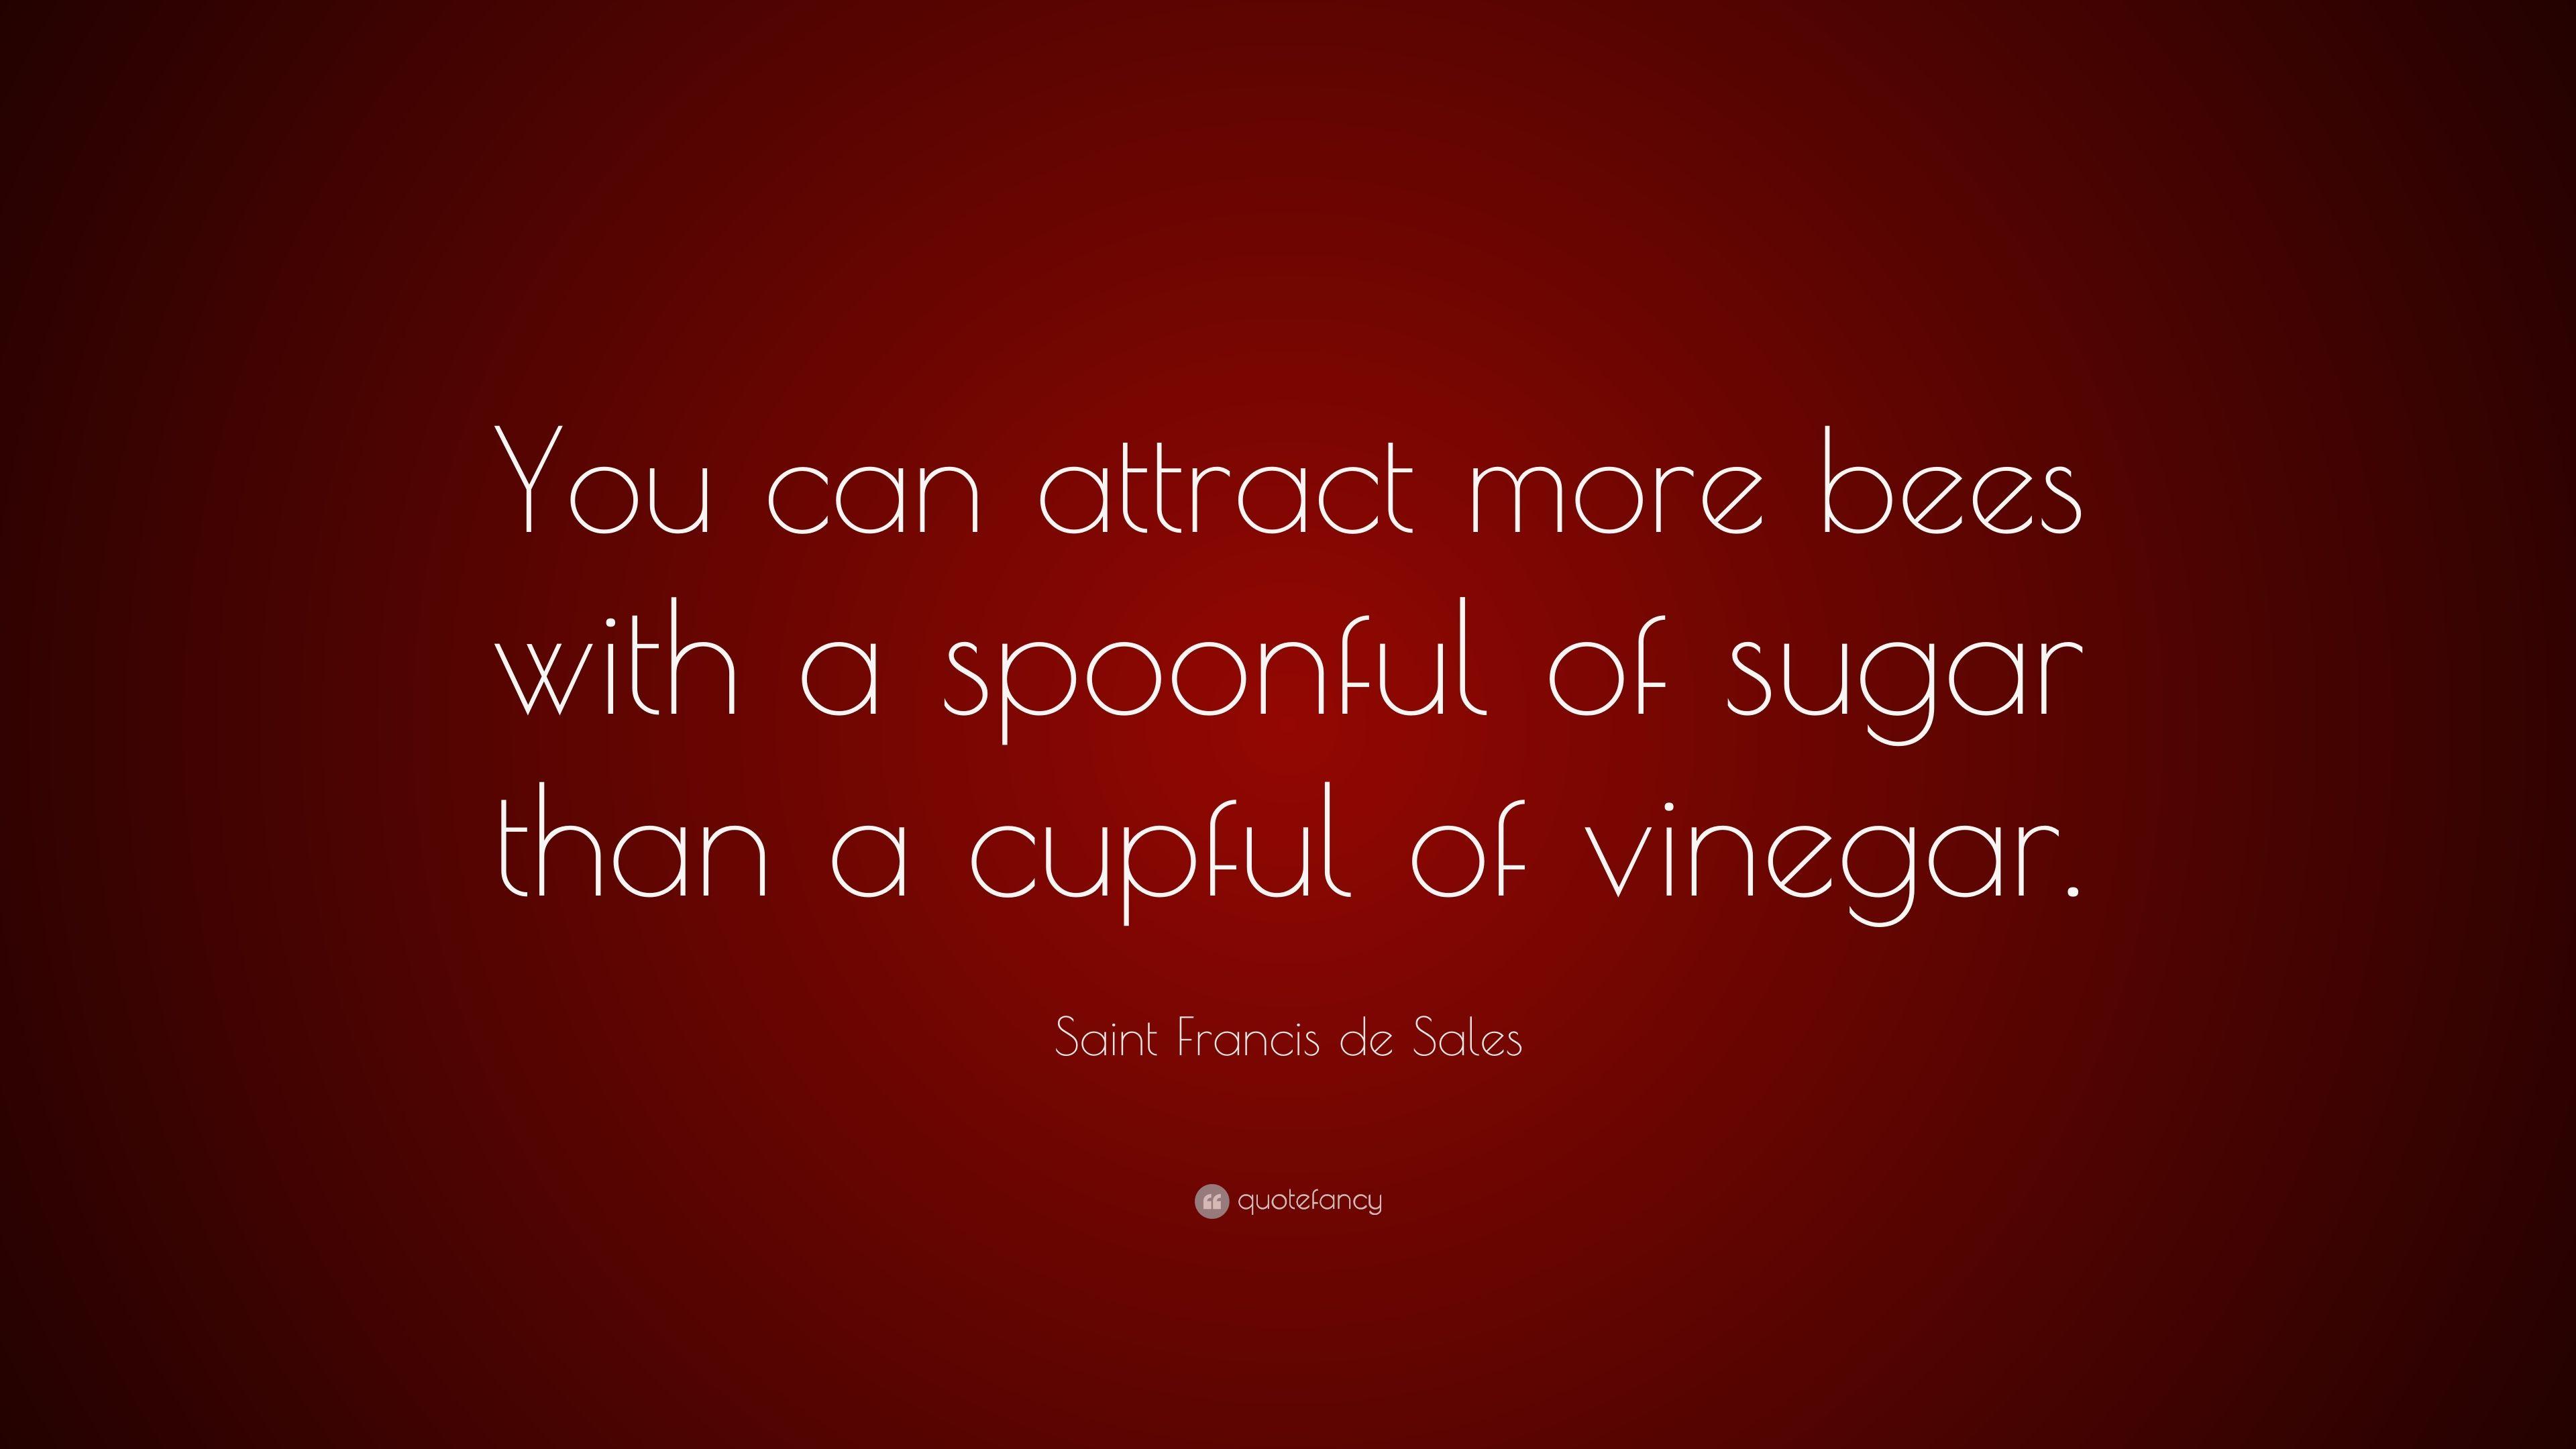 Saint Francis de Sales Quote: “You can attract more bees with a